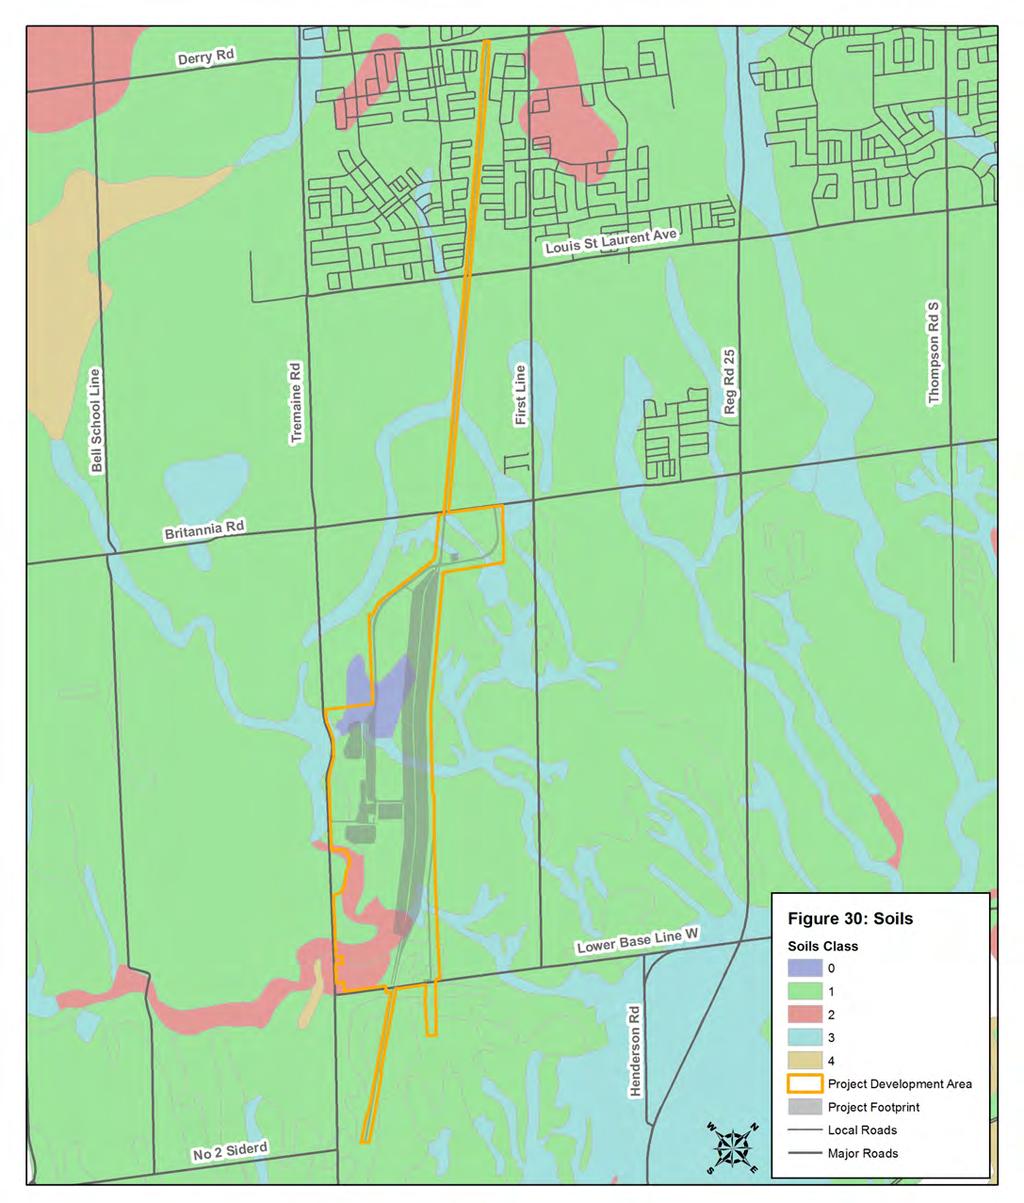 HALTON MUNICIPALITIES BRIEF: APPENDIX A 30 Project location in relation to soil quality at and around the Project site.